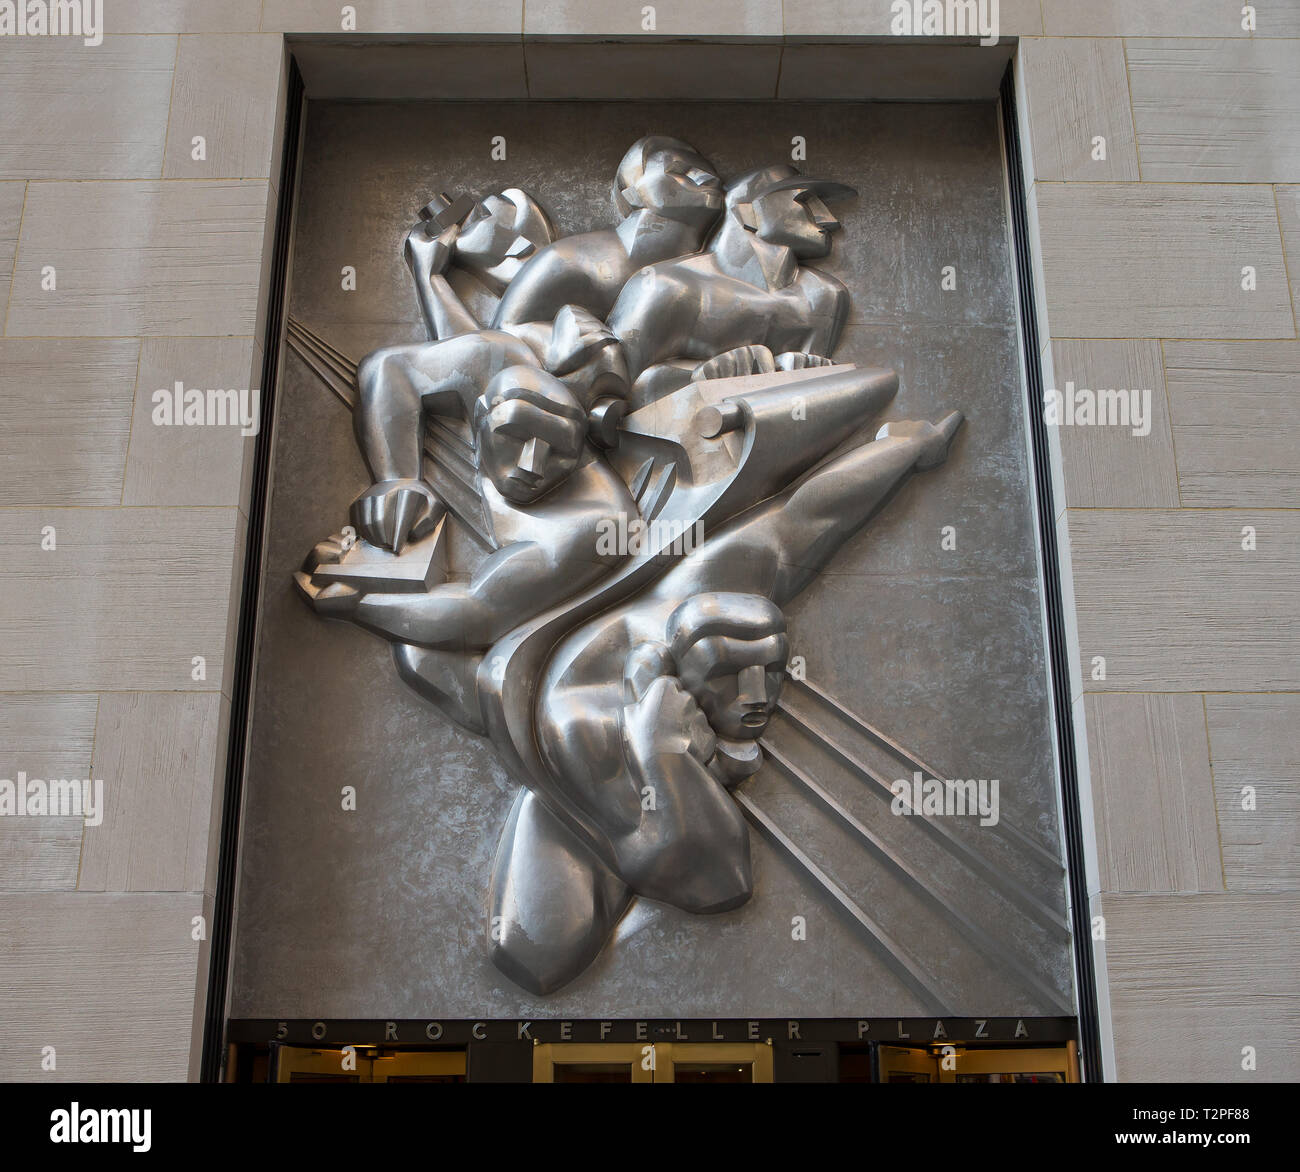 Isamu Noguchi's 10-short-ton (8.9-long-ton) stainless steel panel, News, located above the entrance to 50 Rockefeller Plaza (formerly the Associated P Stock Photo